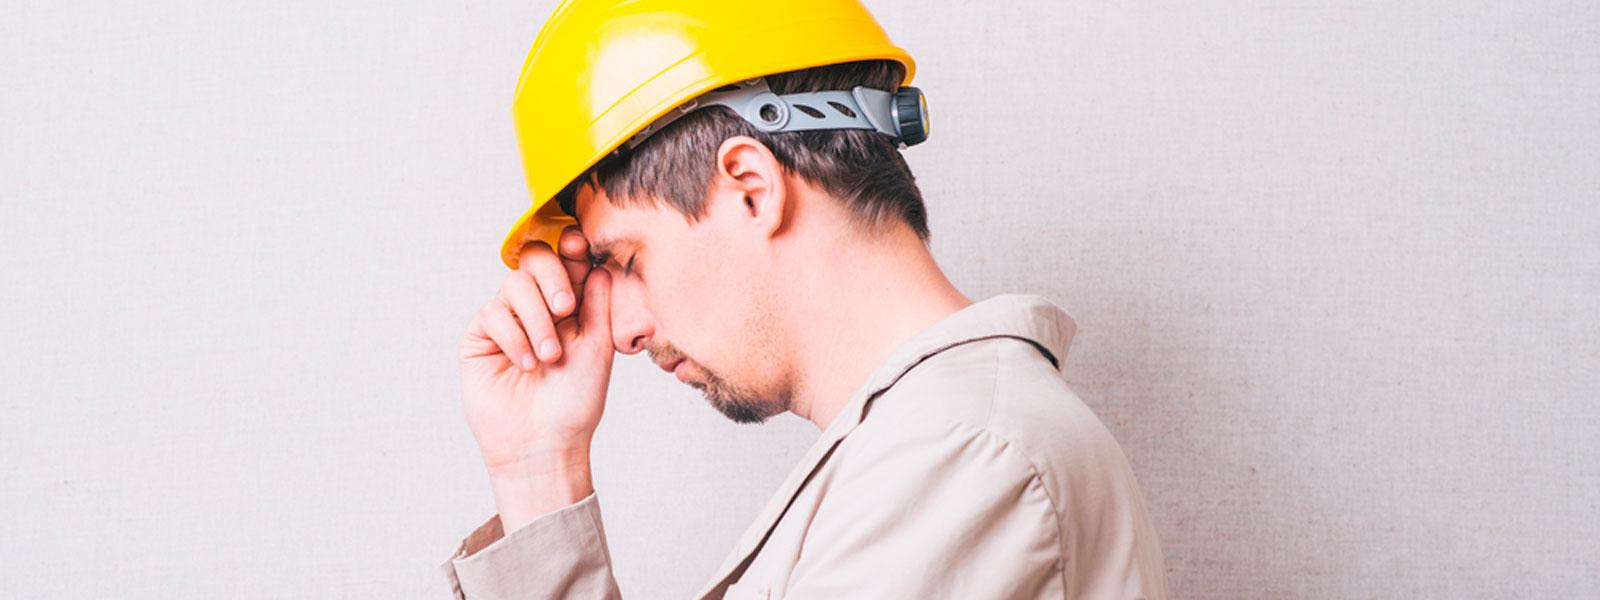 Construction worker with poor mental health